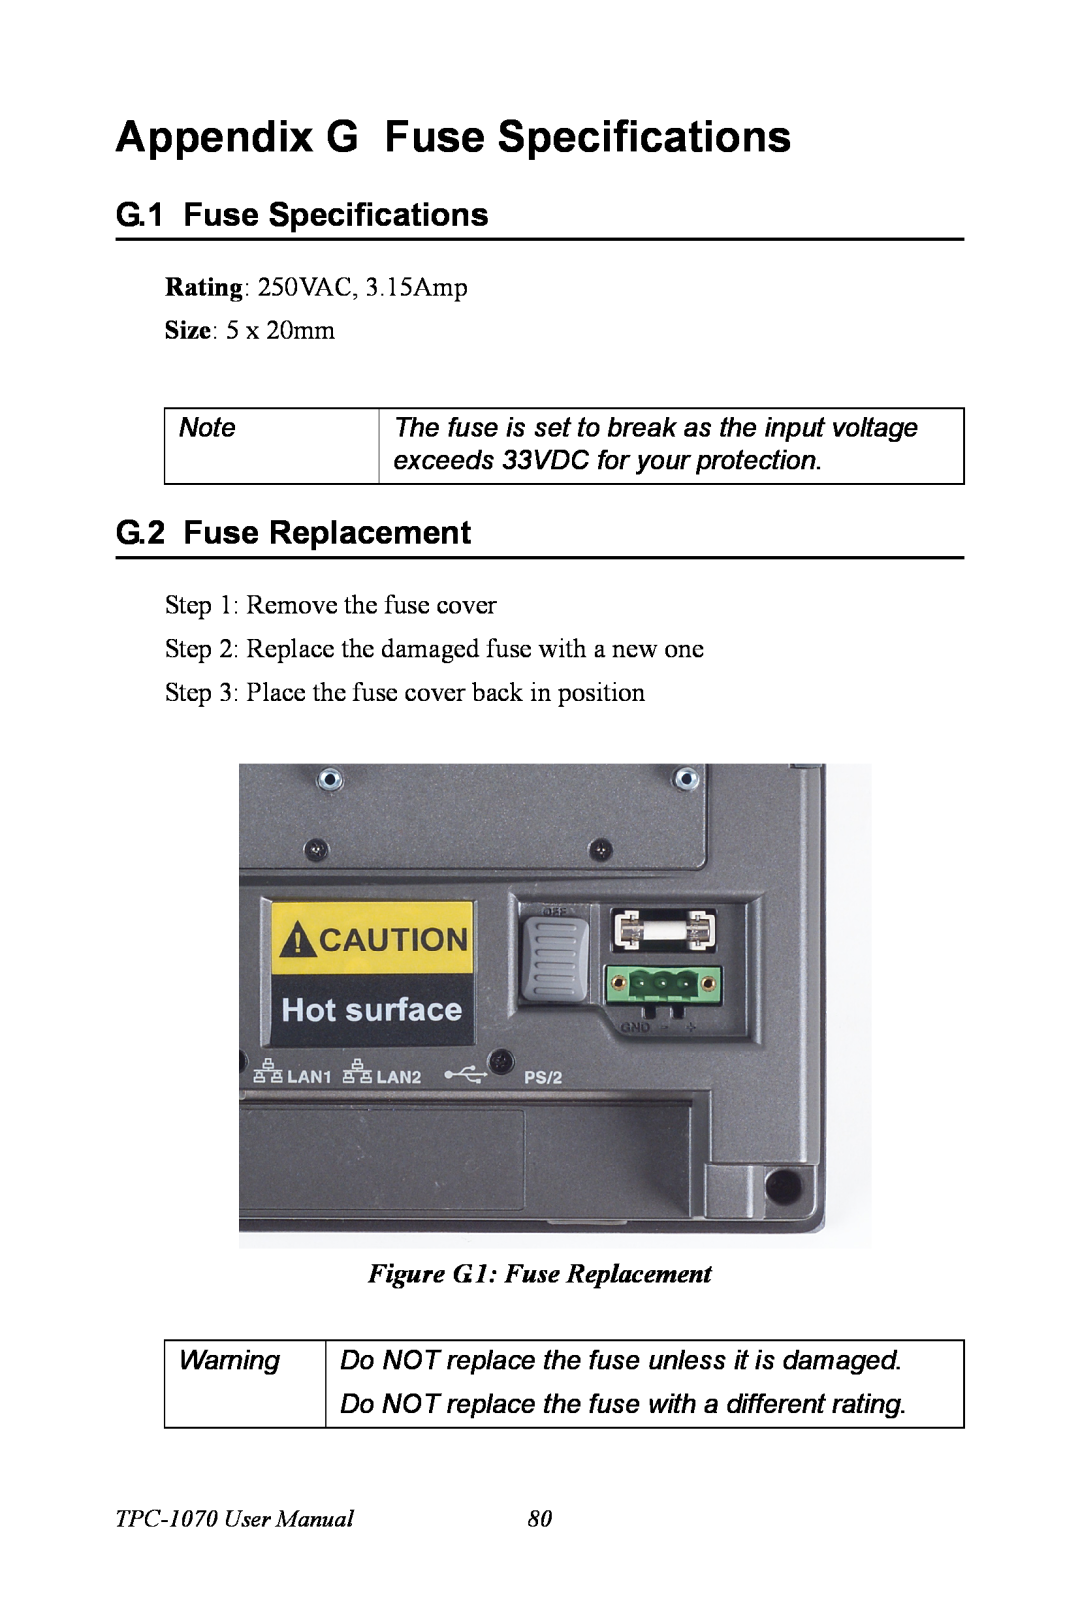 Intel TPC-1070 Appendix G Fuse Specifications, G.1 Fuse Specifications, G.2 Fuse Replacement, Figure G.1 Fuse Replacement 